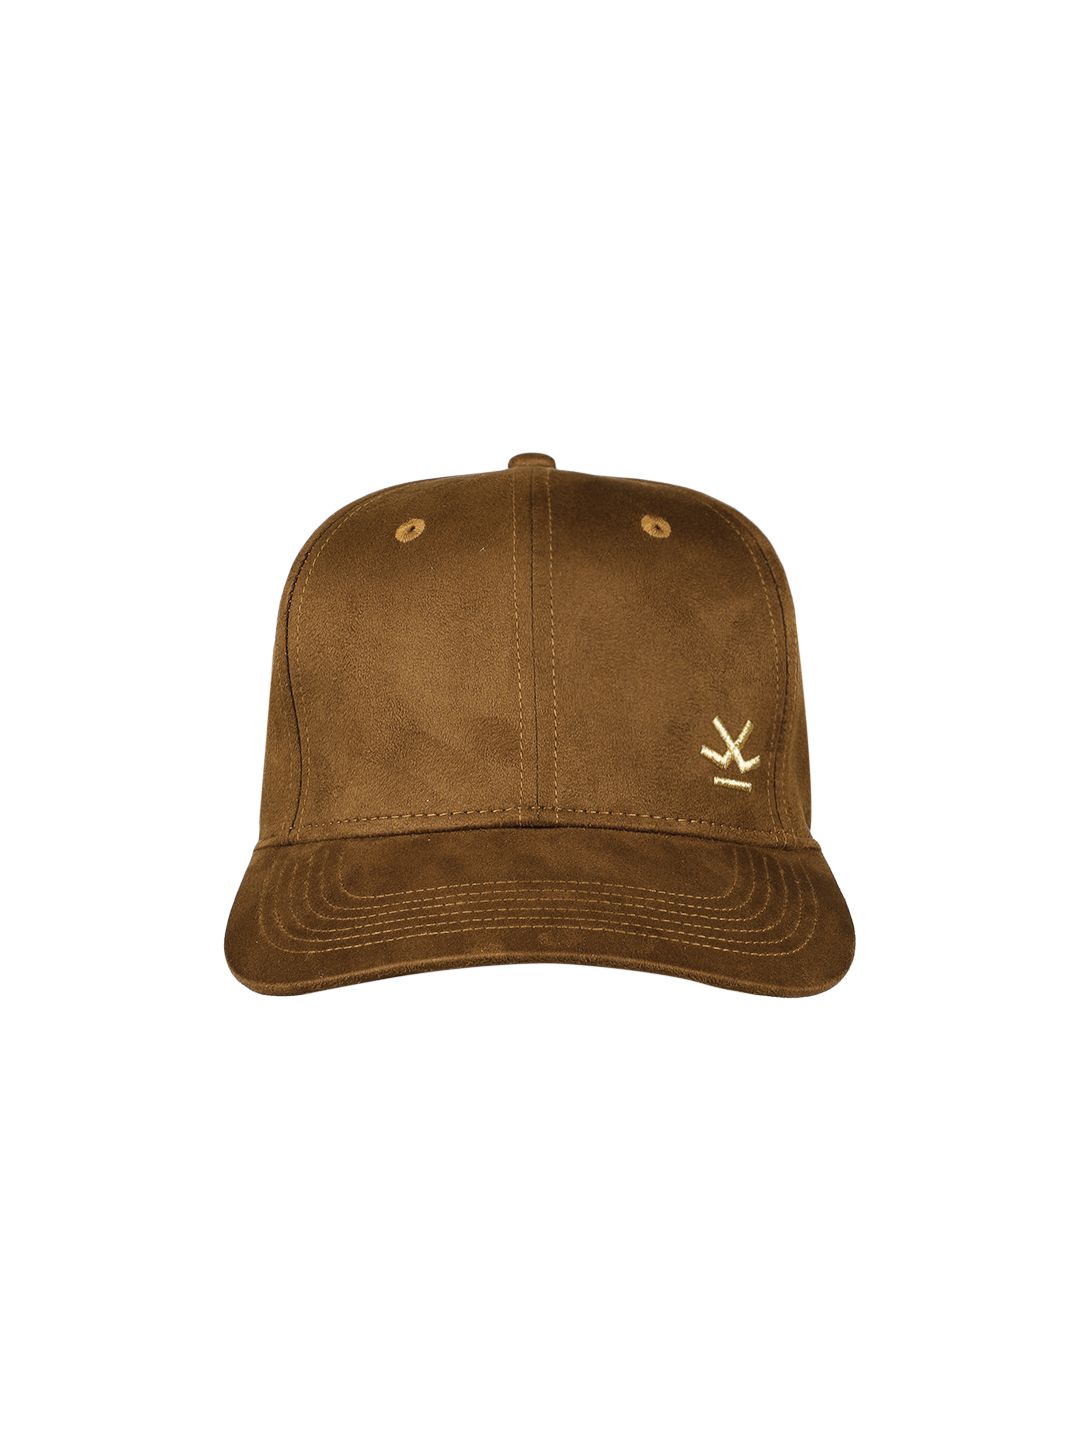 WROGN Unisex Brown Solid Baseball Cap Price in India